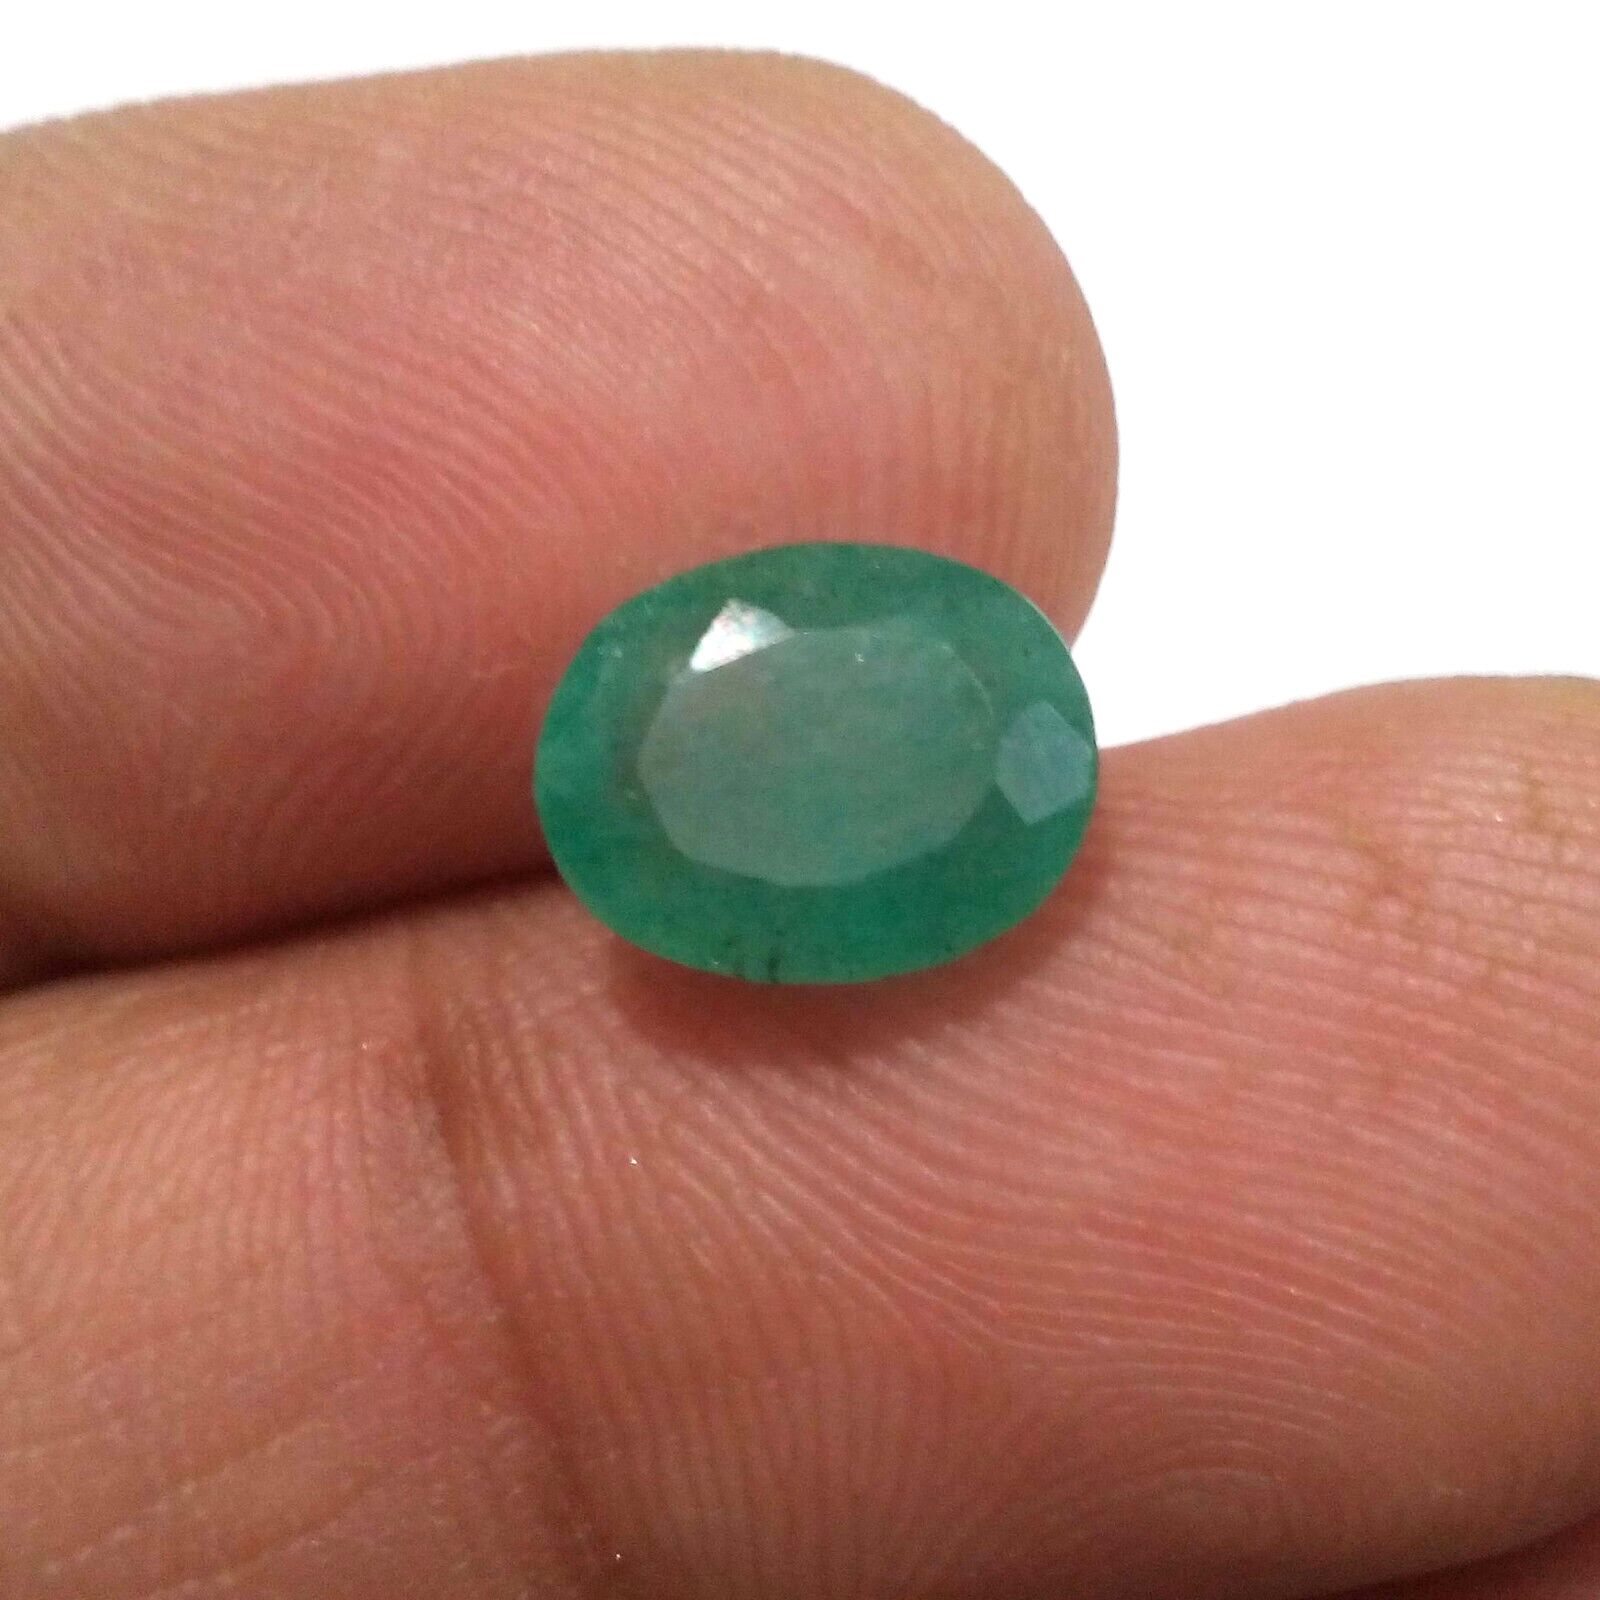 Outstanding Zambian Emerald Oval 3.10 Crt Awesome Green Faceted Loose Gemstone